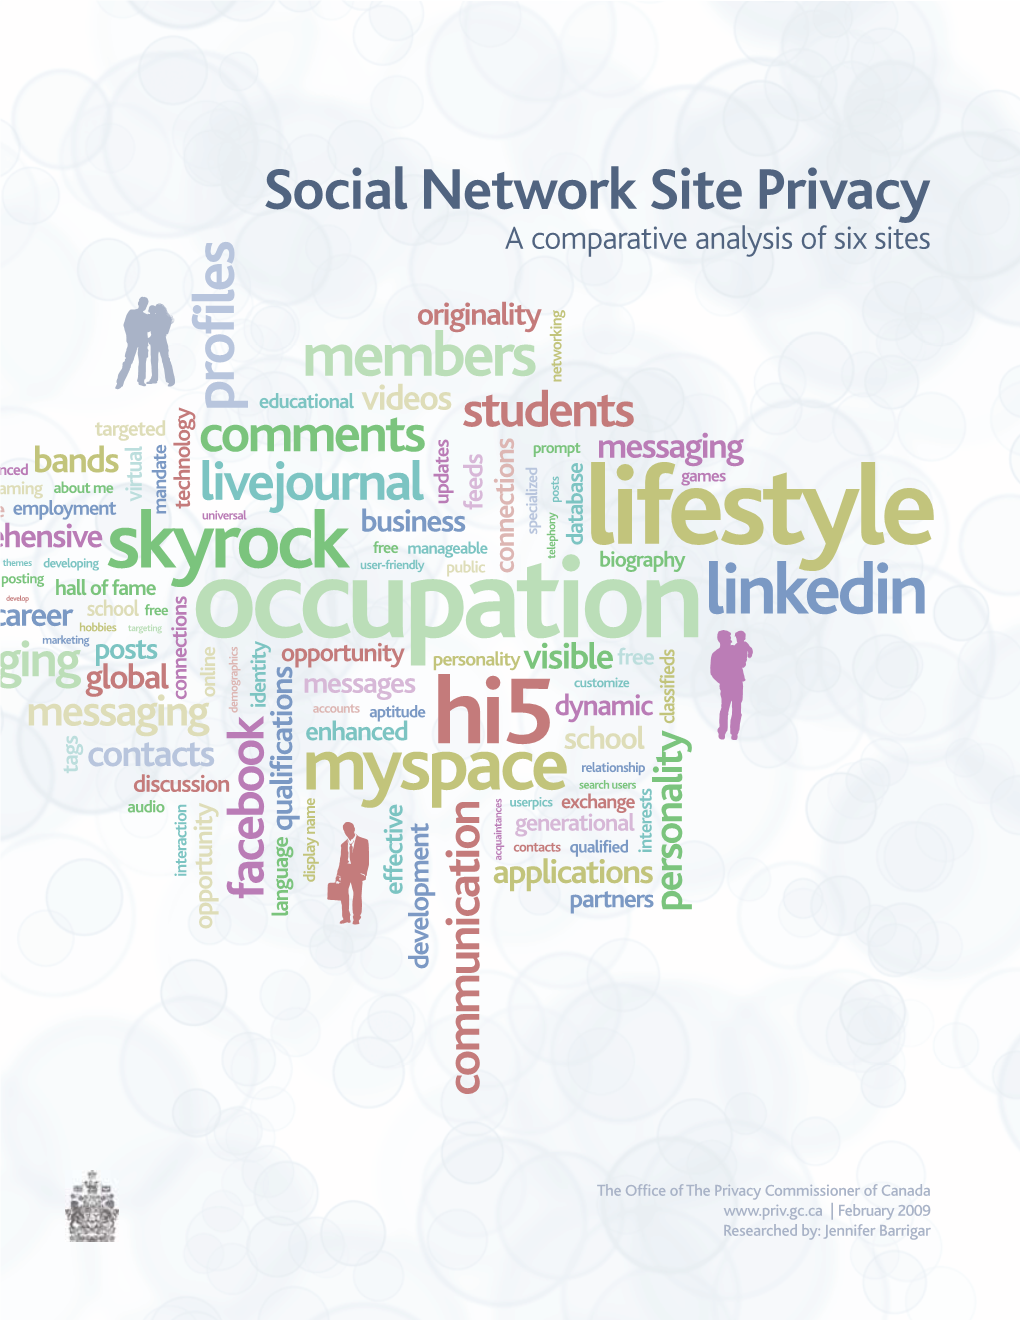 Social Network Site Privacy | a Comparative Analysis of Six Sites